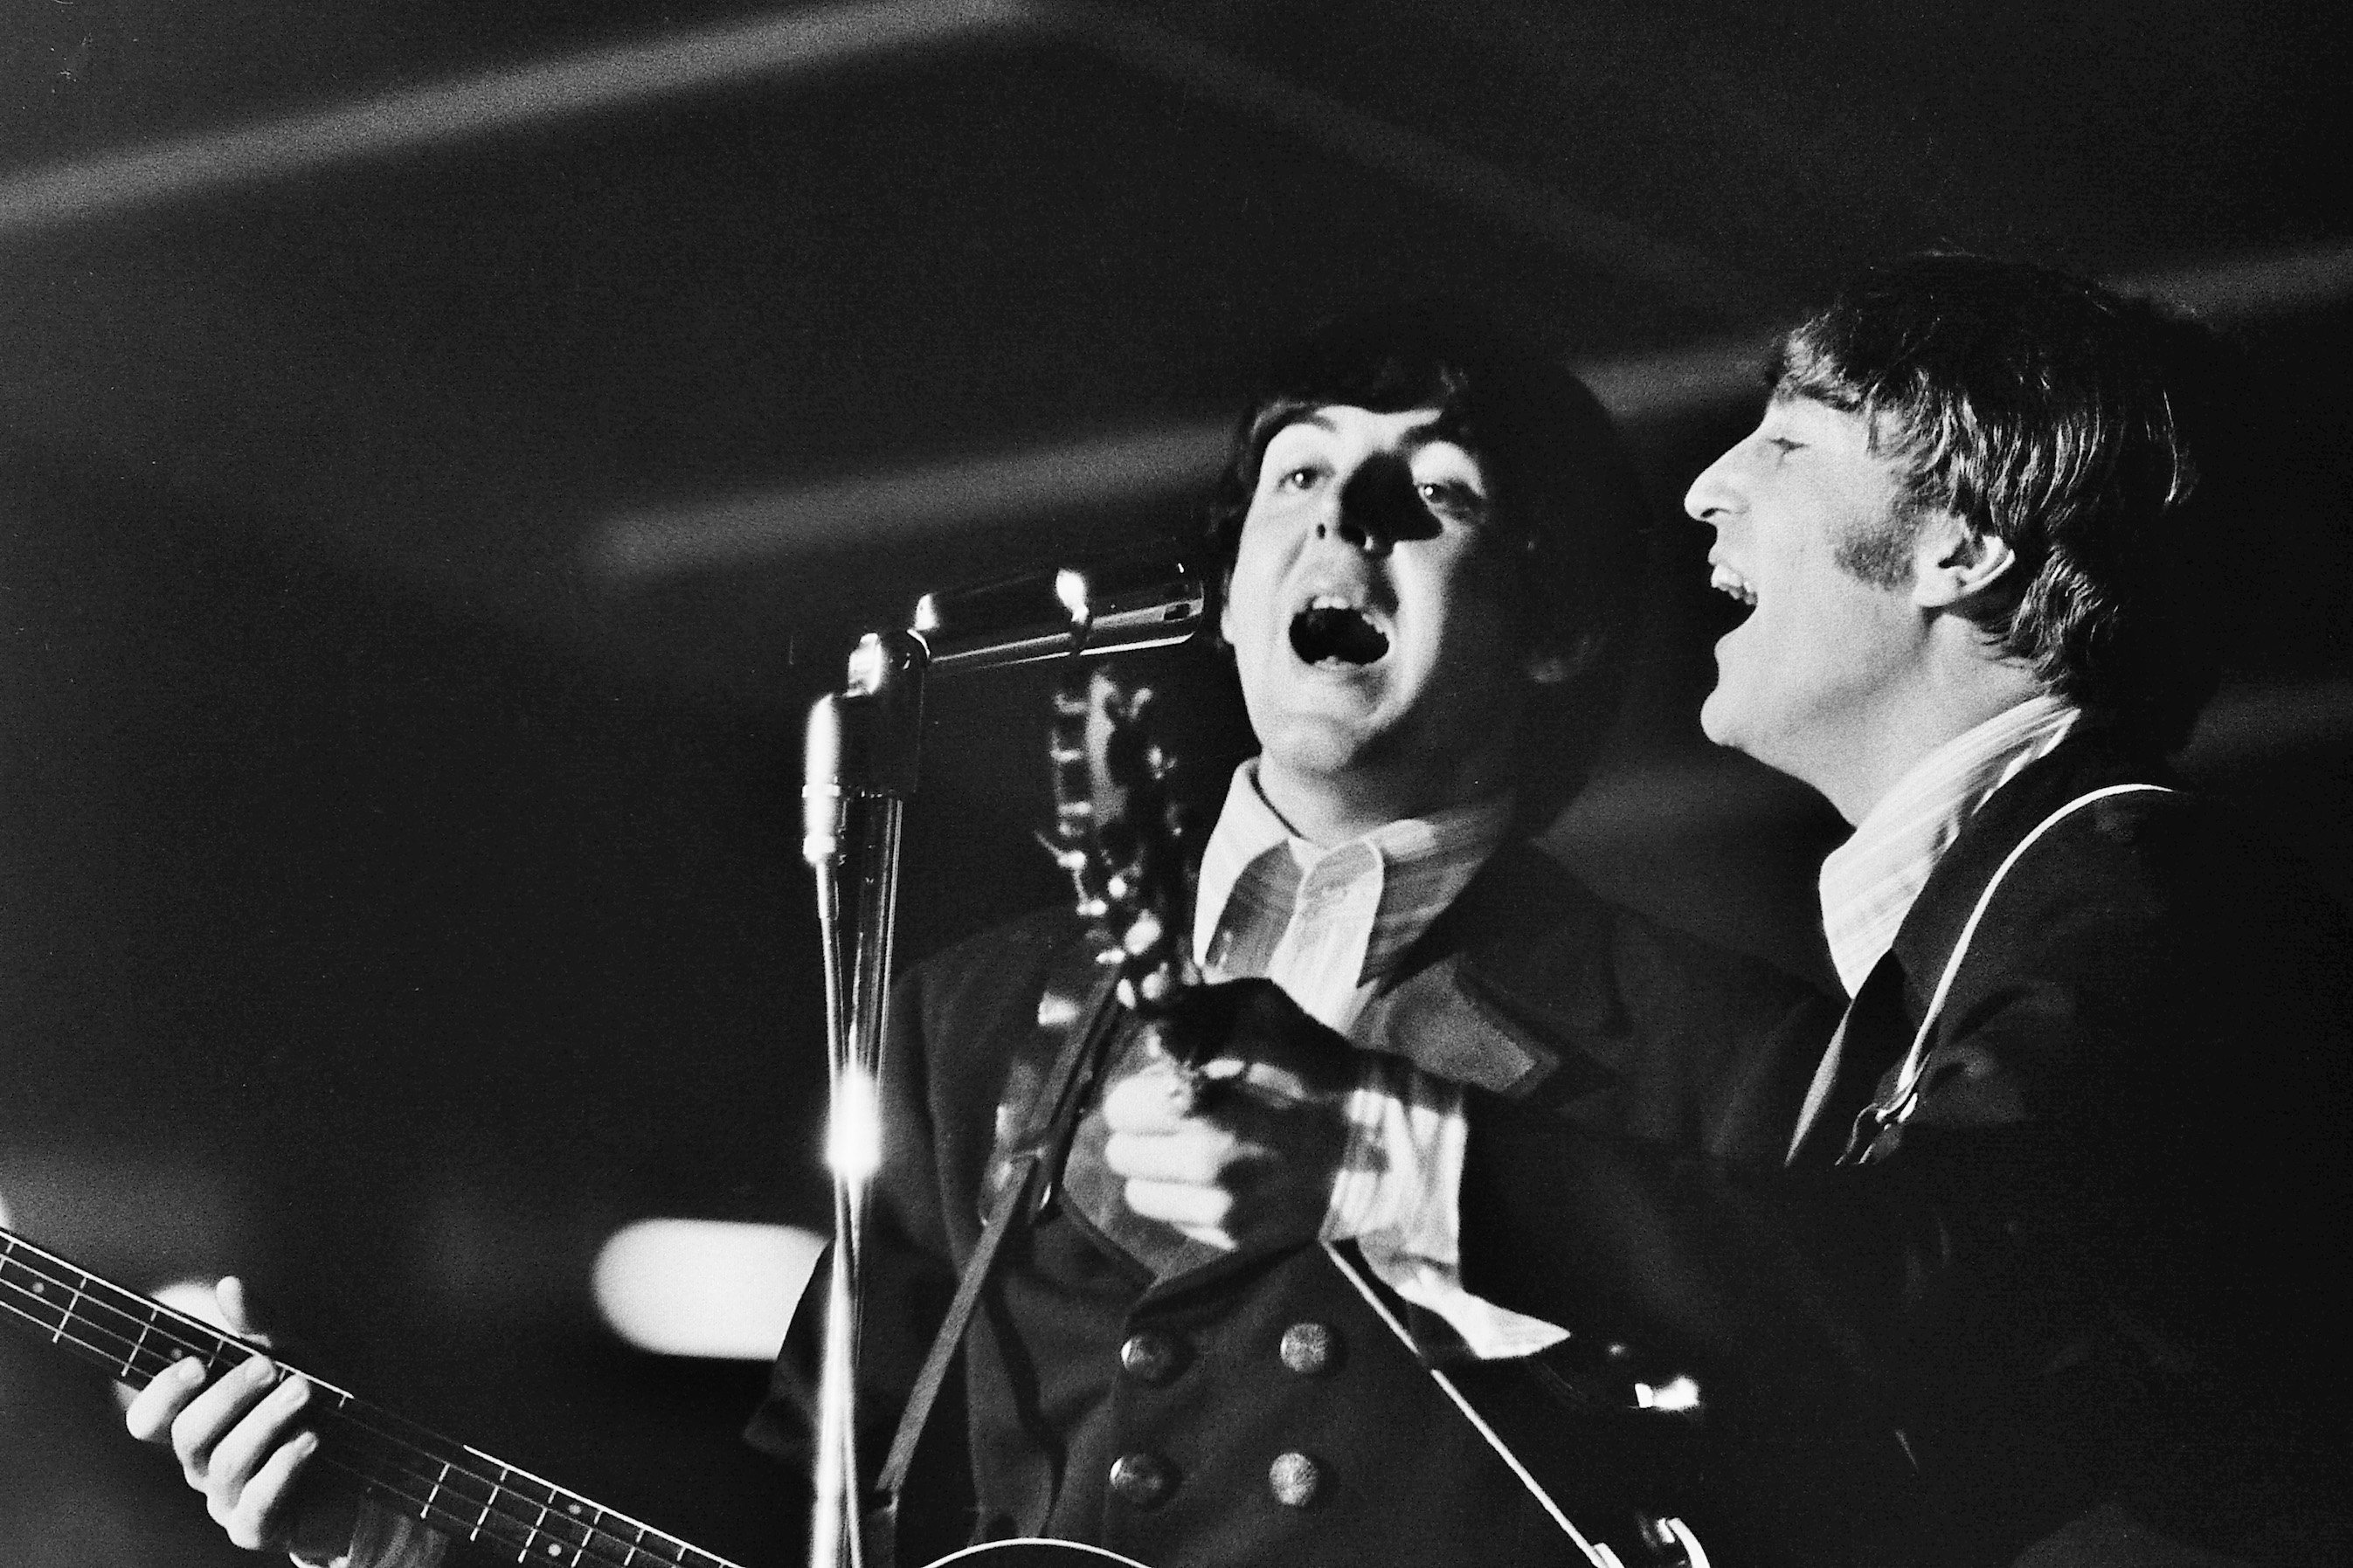 Paul McCartney and John Lennon perform with The Beatles in St. Louis